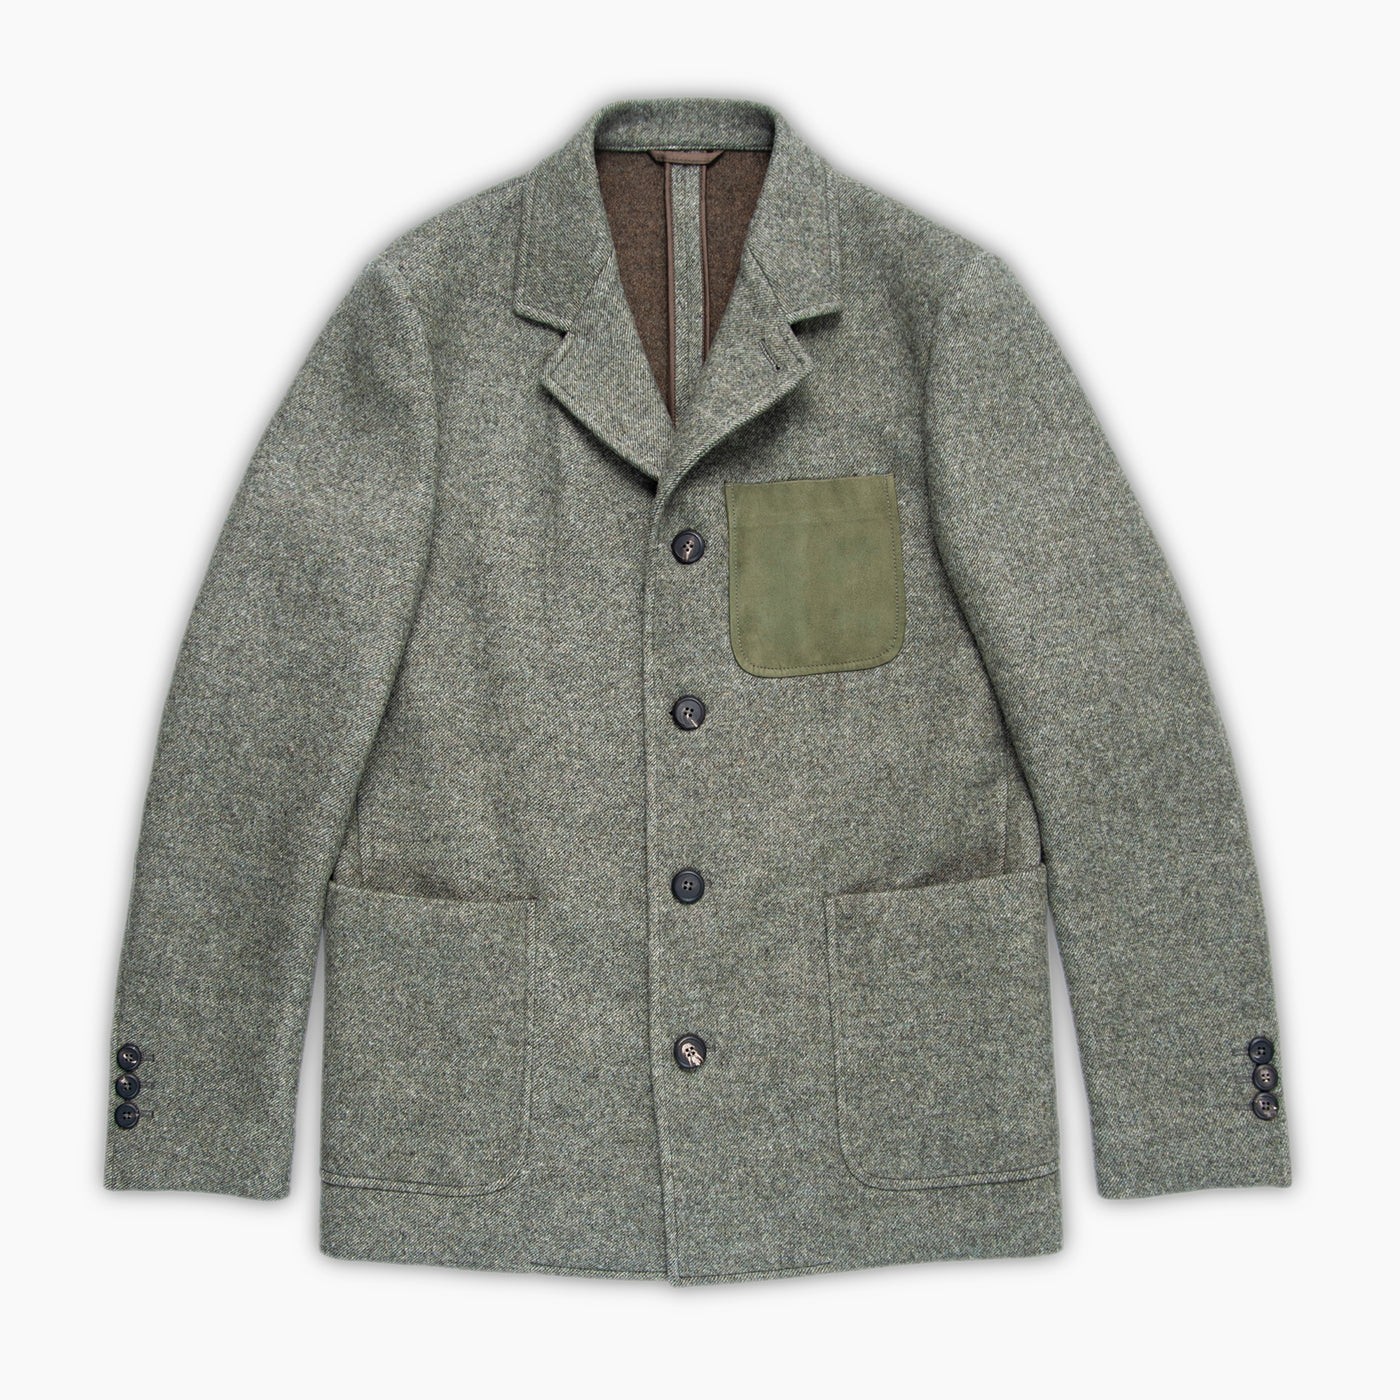 Bard double felted wool and cashmere blazer